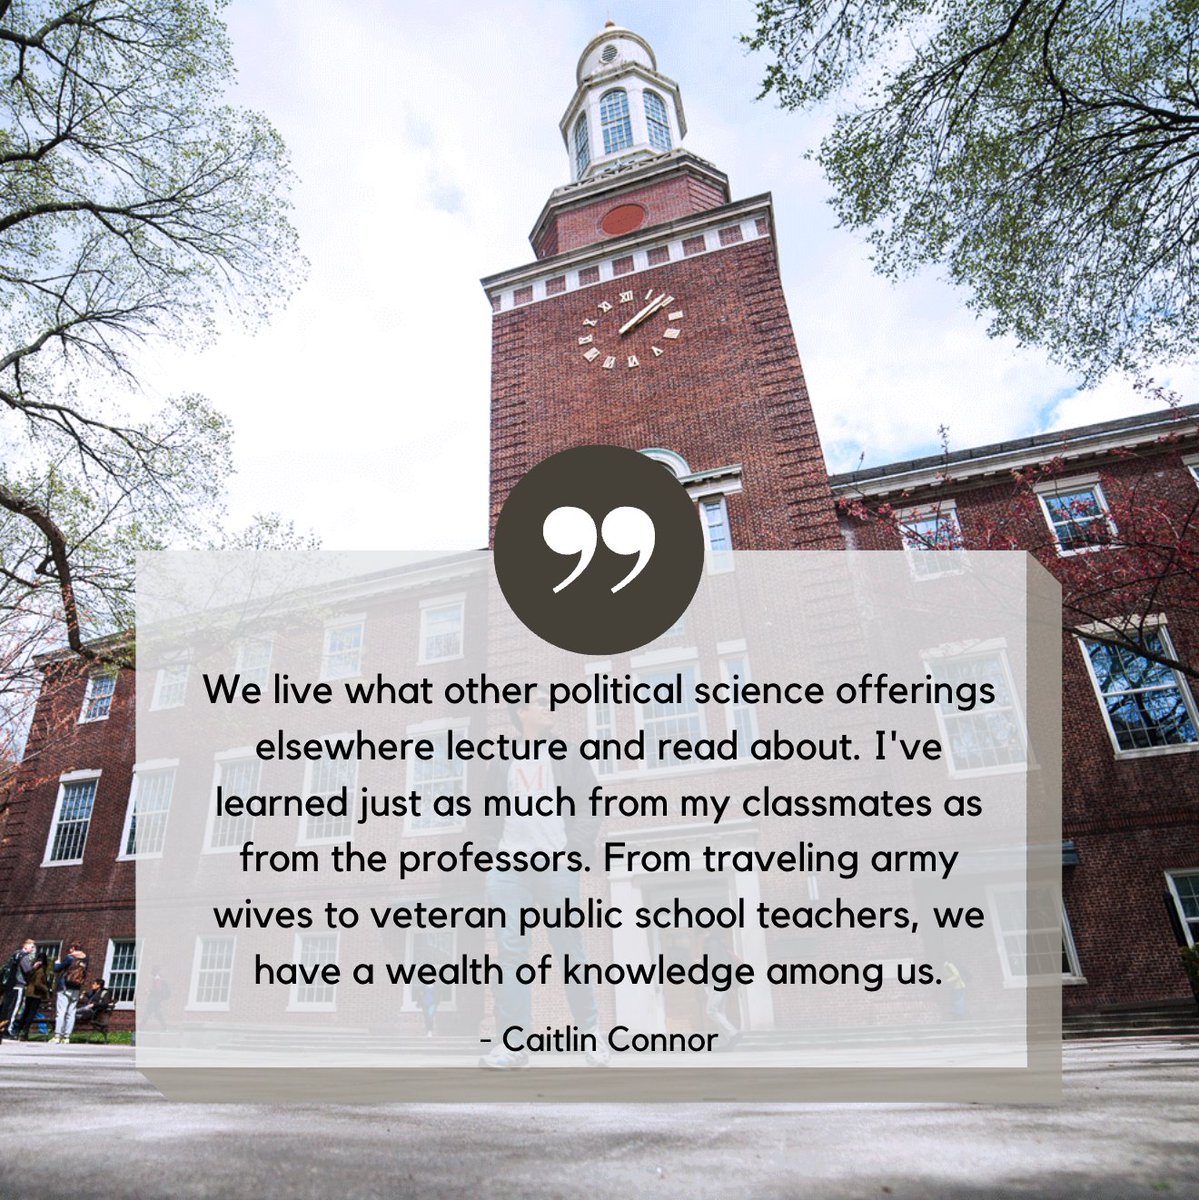 🎓 Caitlin Connor, BA graduate, celebrates the wealth of knowledge among her classmates. At Brooklyn College, we go beyond lectures and textbooks, learning from our classmates who bring diverse perspectives and real-life experiences. 🌍📚 #BrooklynCollegePride #PoliticalScience